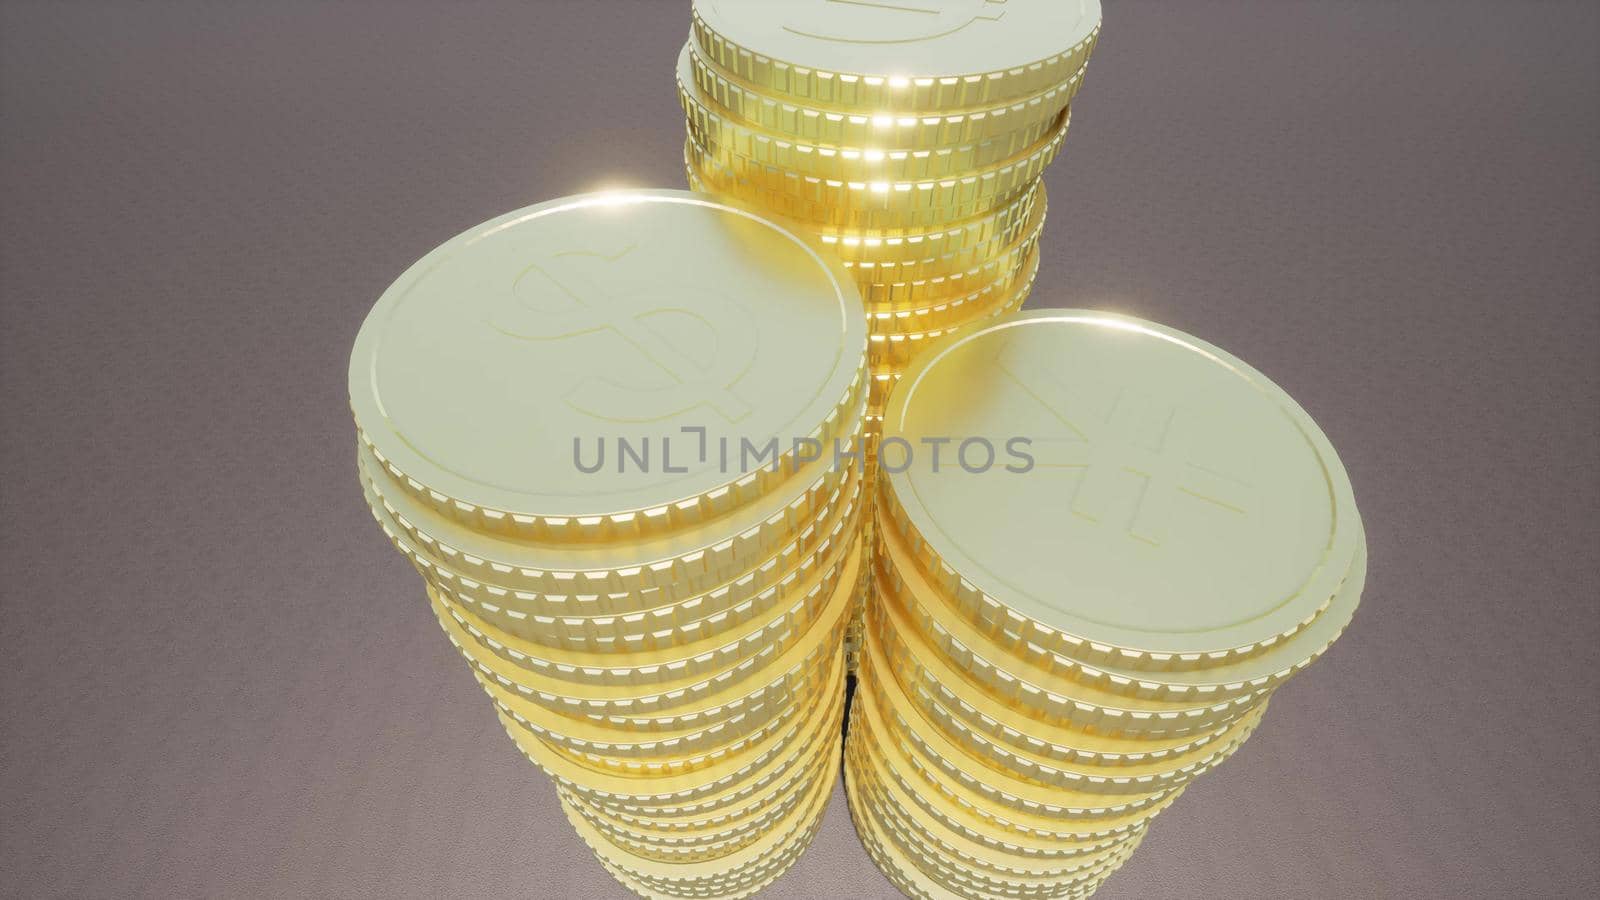 Column gold coins Concept: business cash currency 3d render by Zozulinskyi